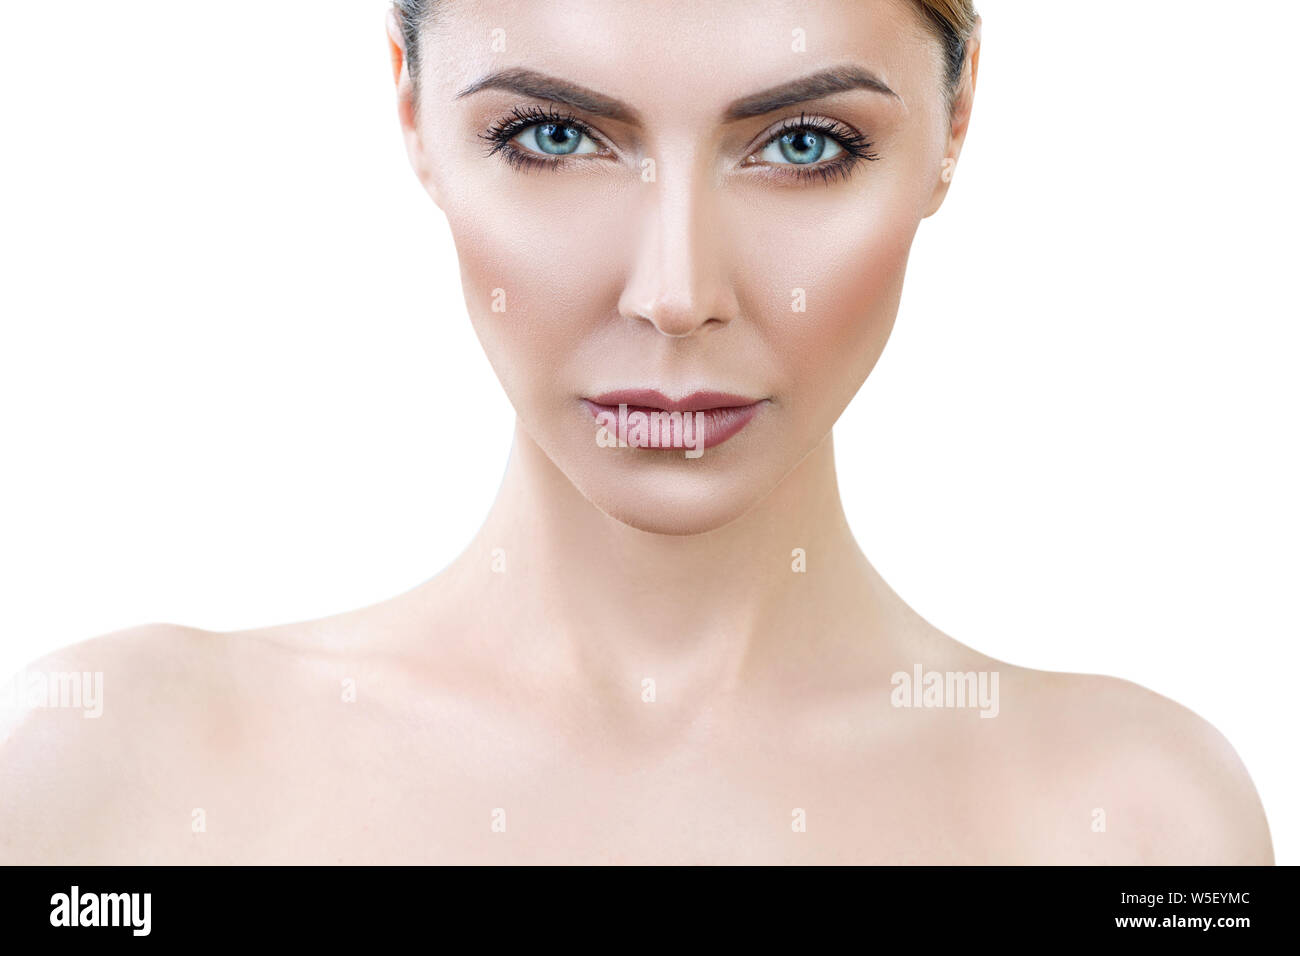 Beautiful adult woman with perfect skin lookin frowning. Stock Photo